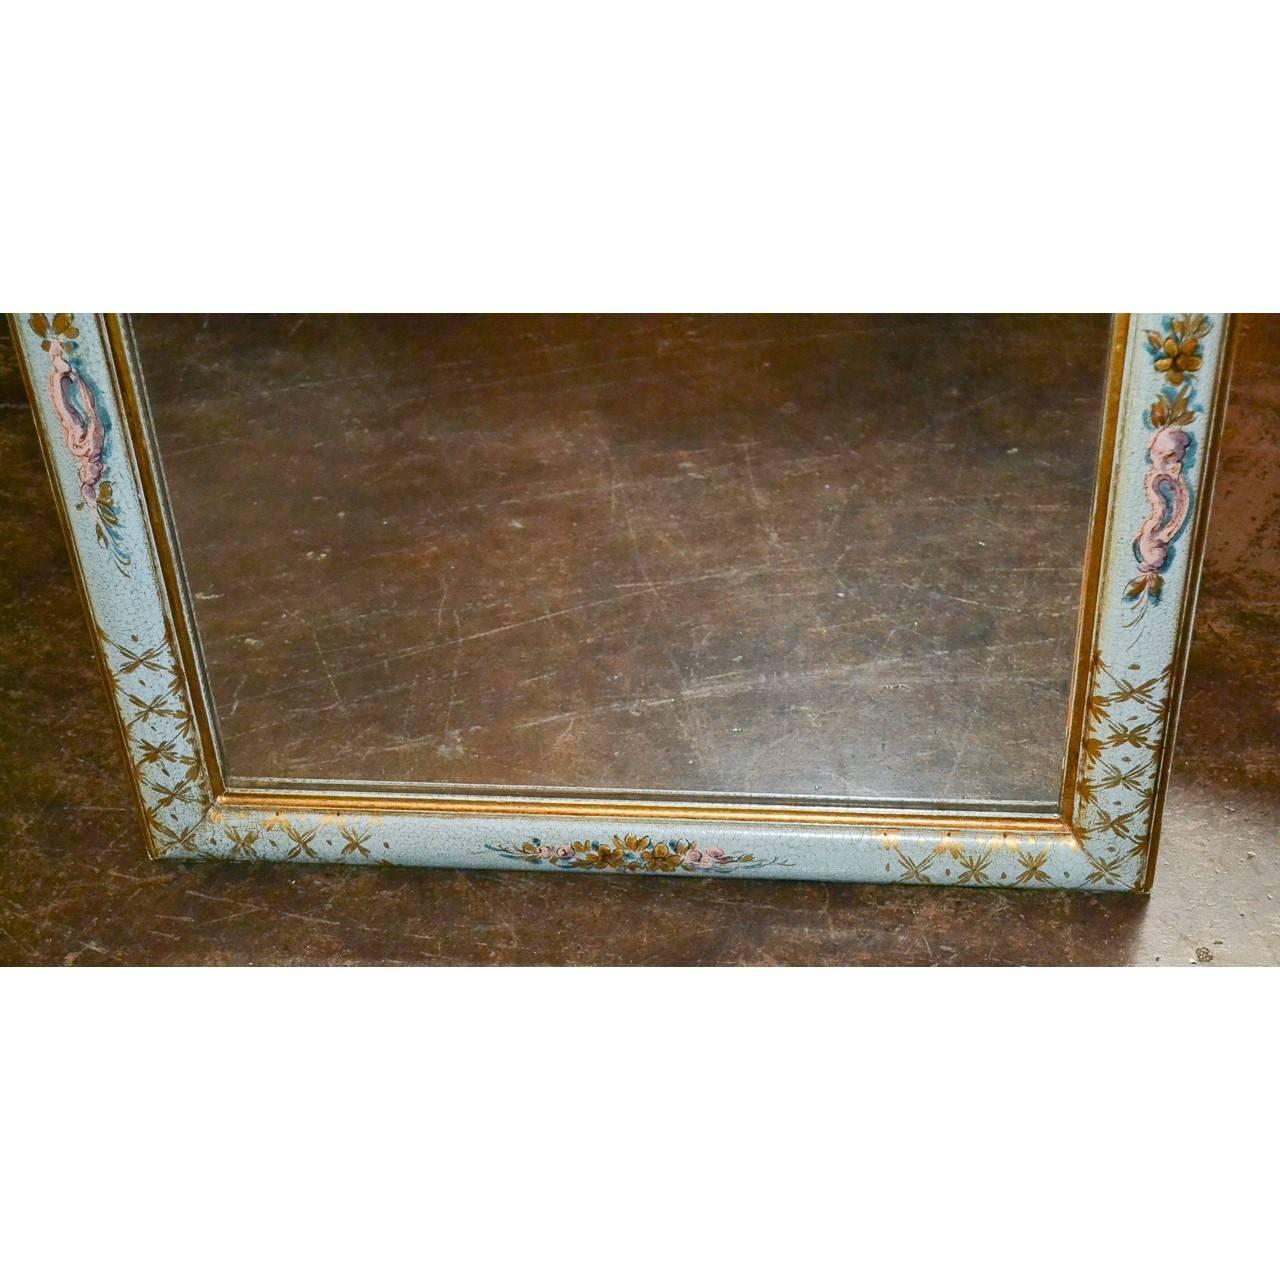 A delightful chinoiserie mirror in the style of Queen Anne.
Made in England in the 1990s.
Lacquered wood.
 